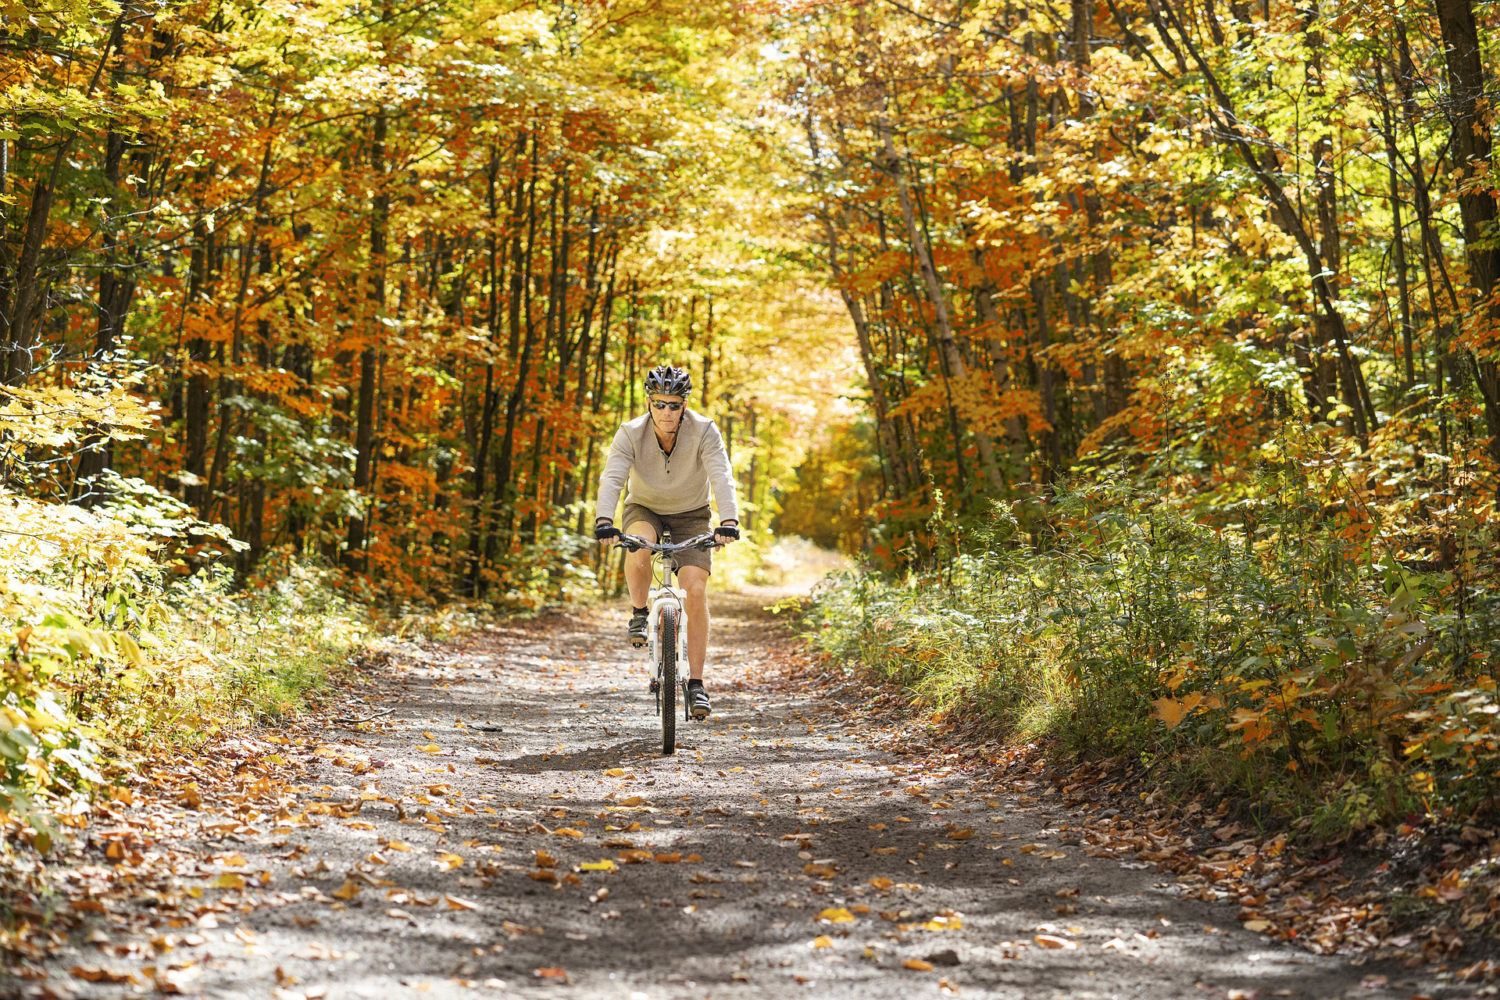 Experience Merrill in fall: Ride in the Colorama Bike Tour